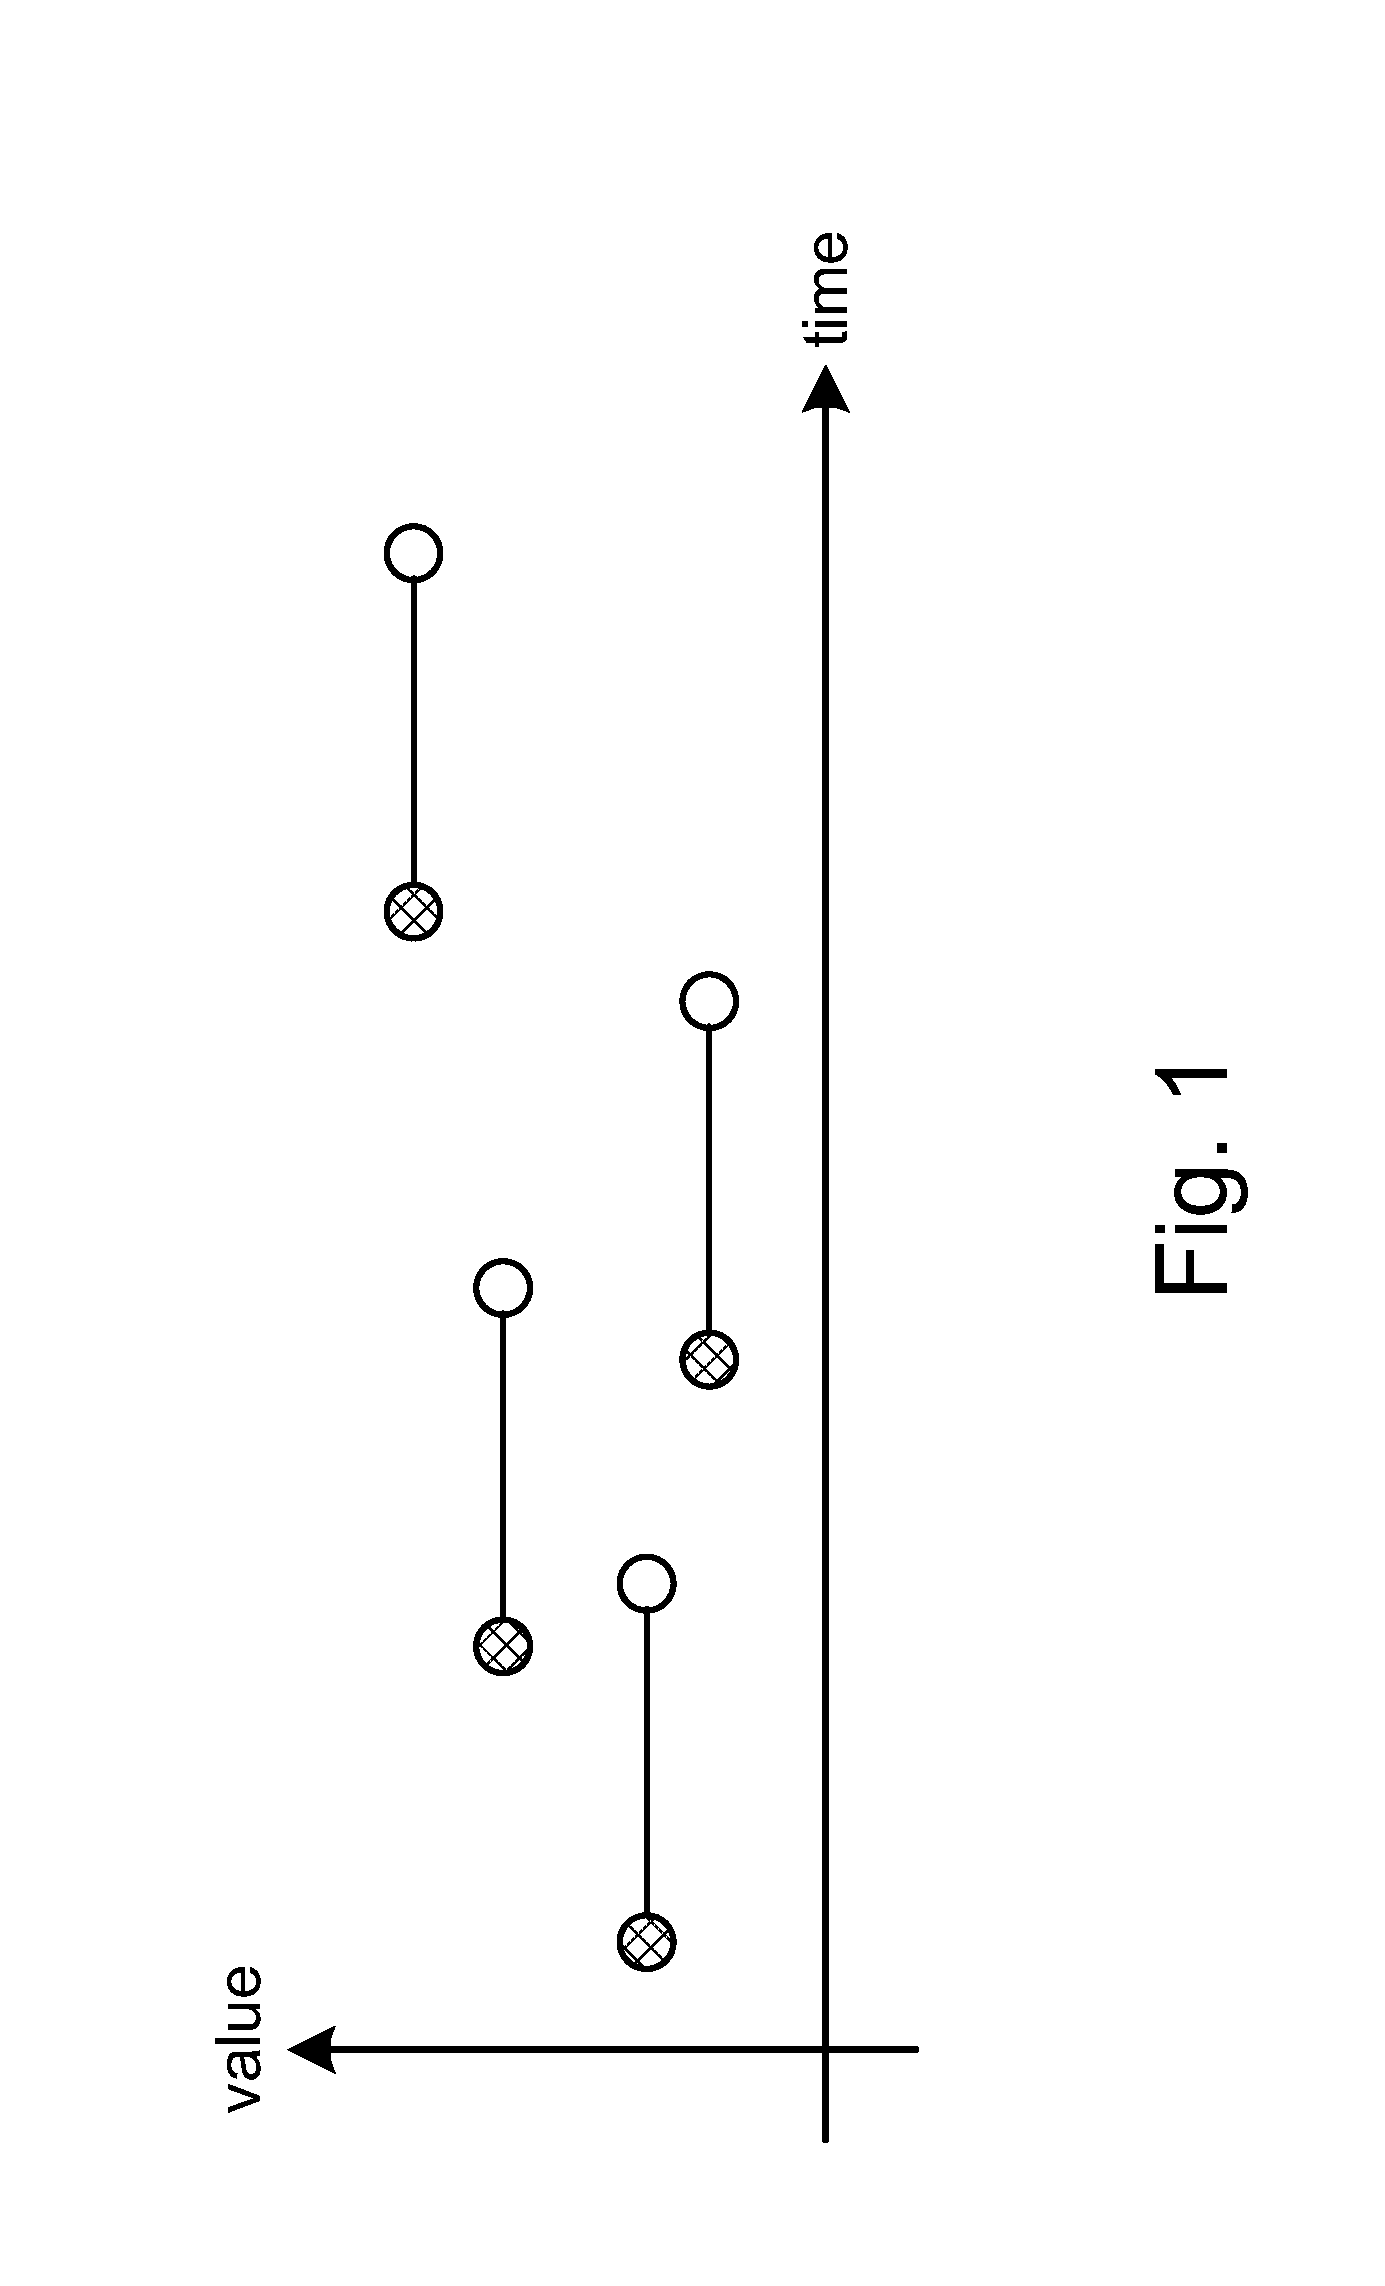 Systems and/or methods for forecasting future behavior of event streams in complex event processing (CEP) environments